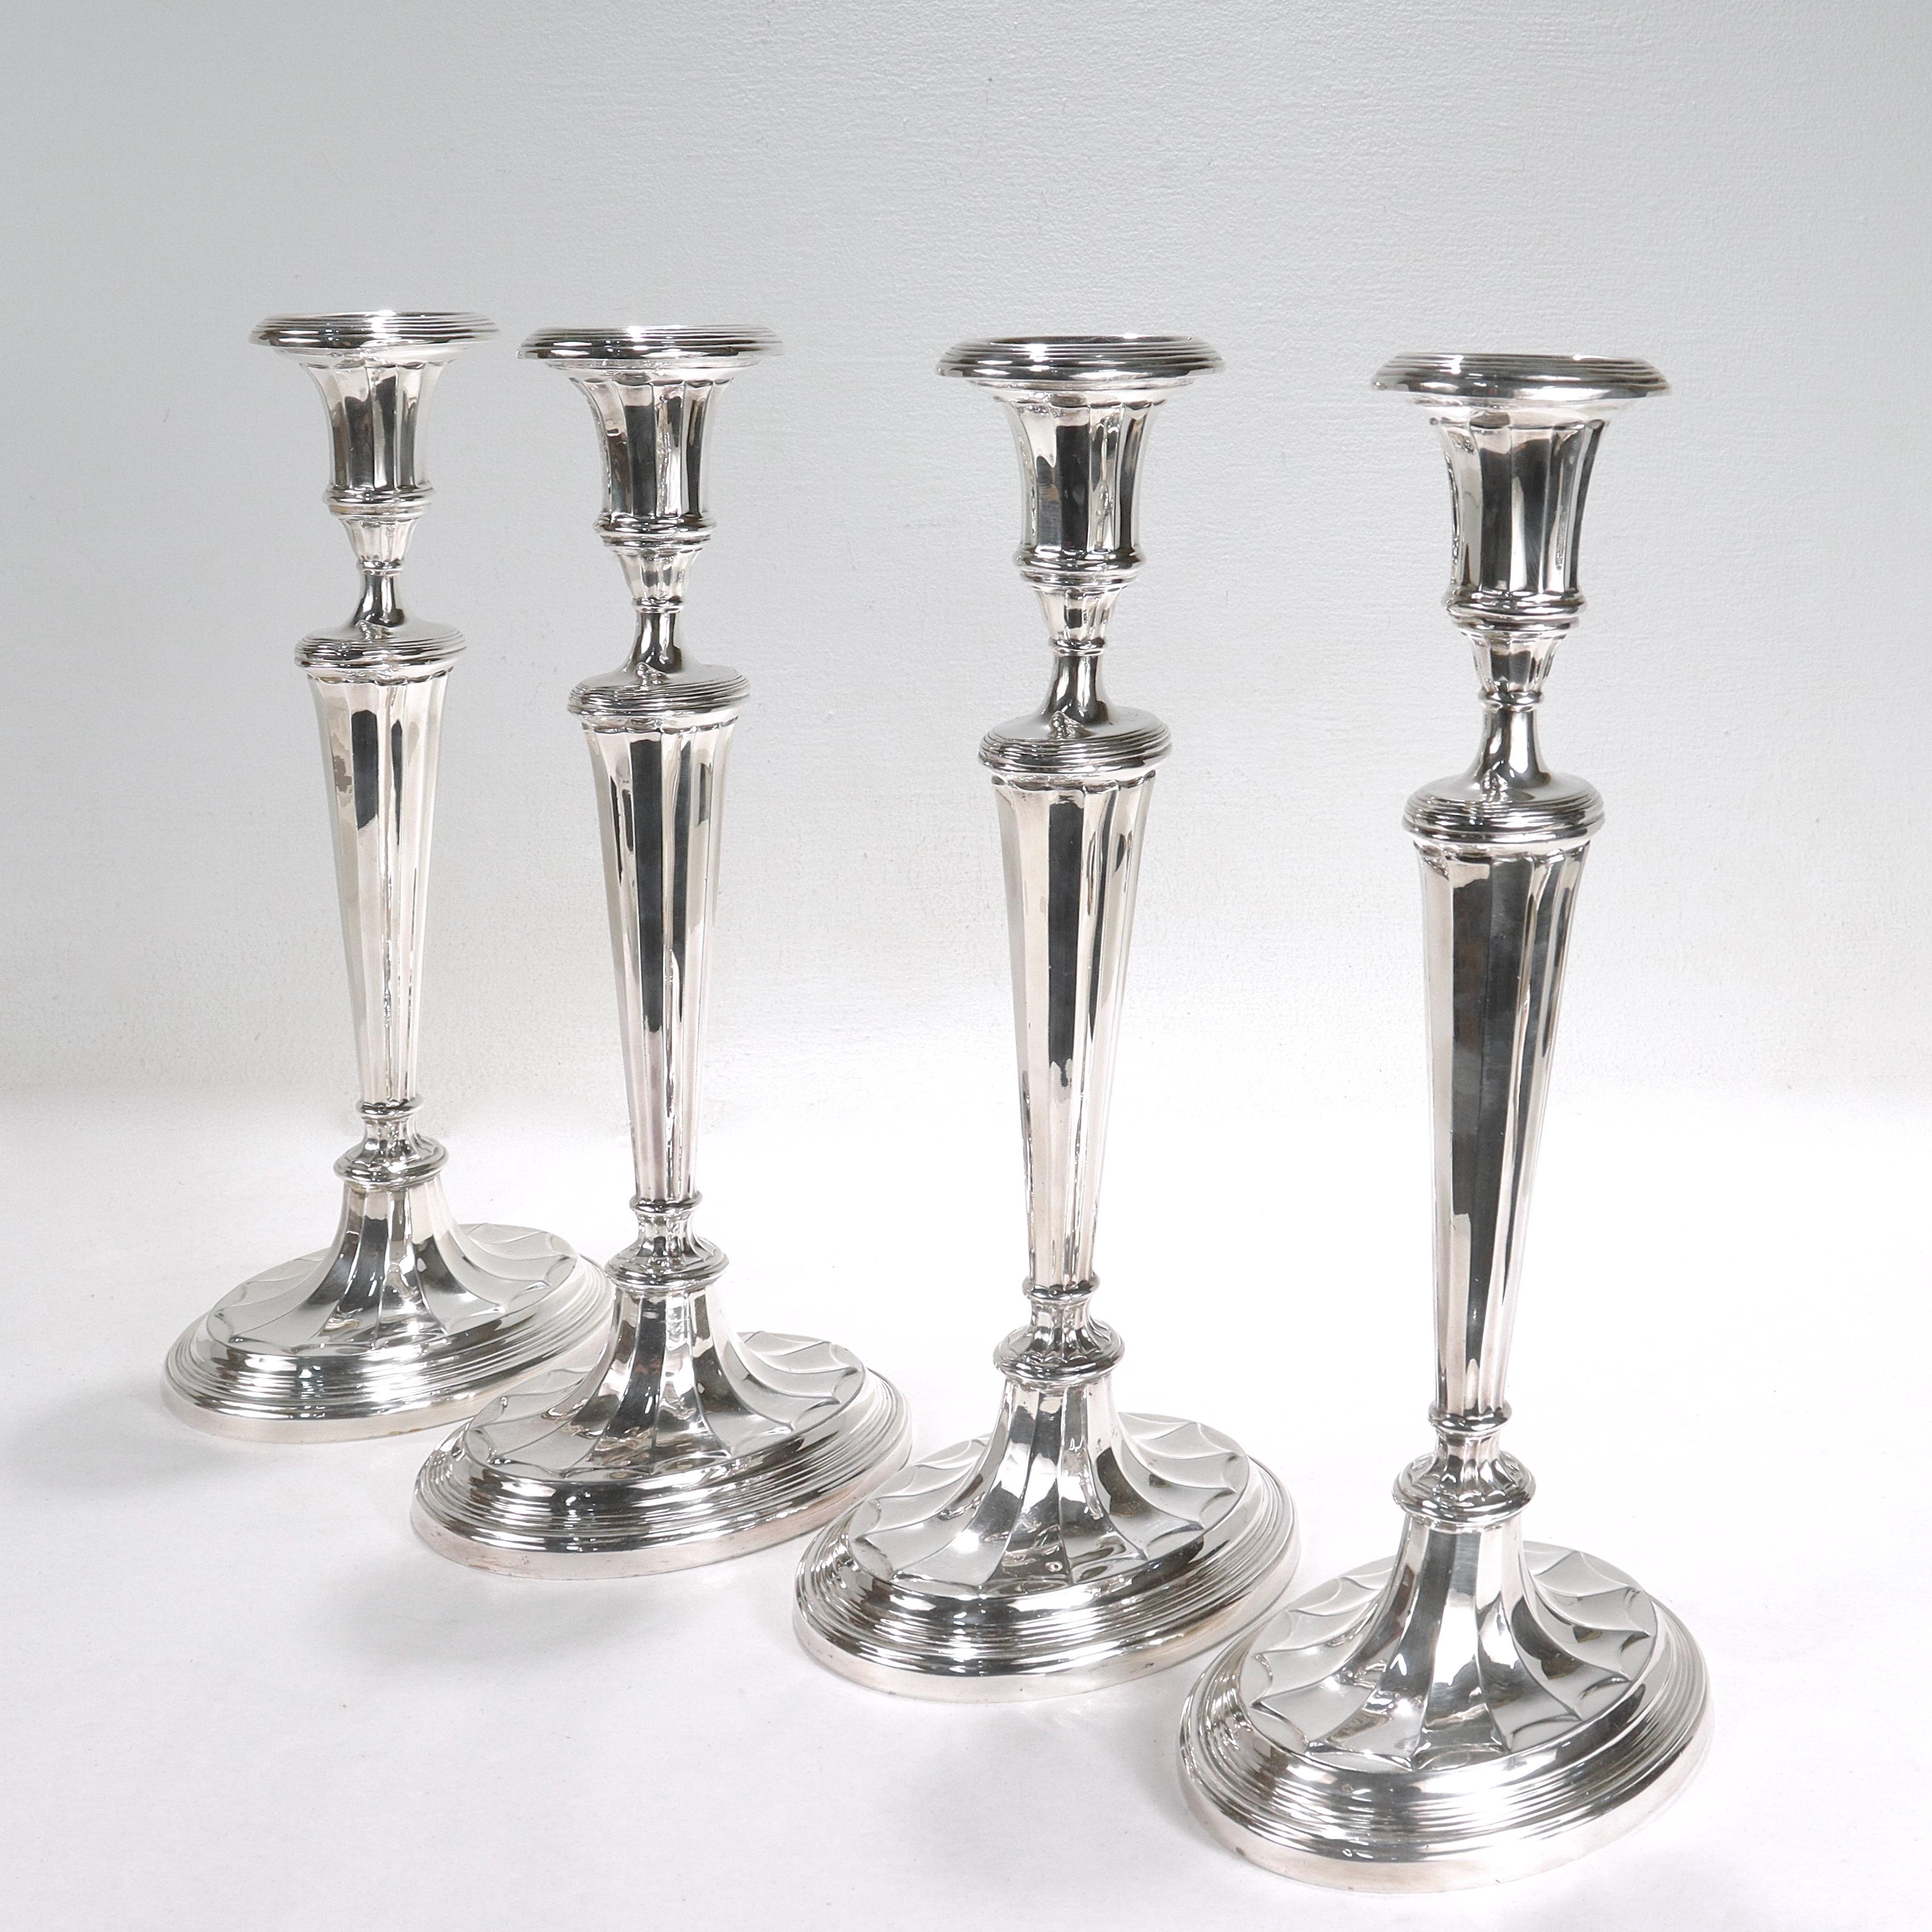 Set of 4 Tall Matched Regency Style Silver Plated Candlesticks For Sale 2